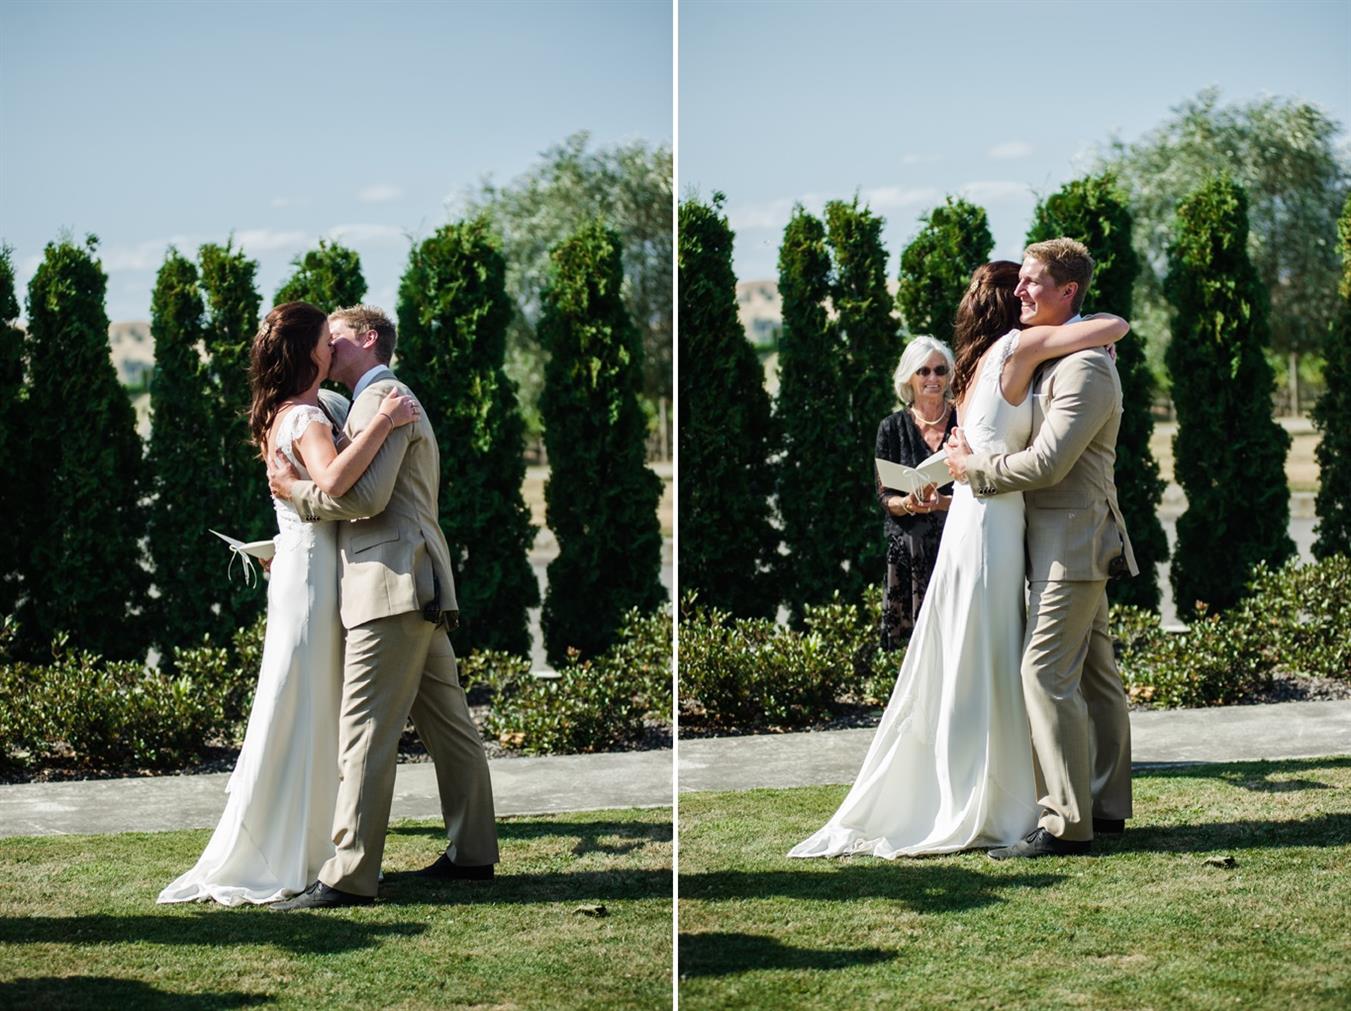 A Stunning Summer Winery Wedding in White from Meredith Lord Photography